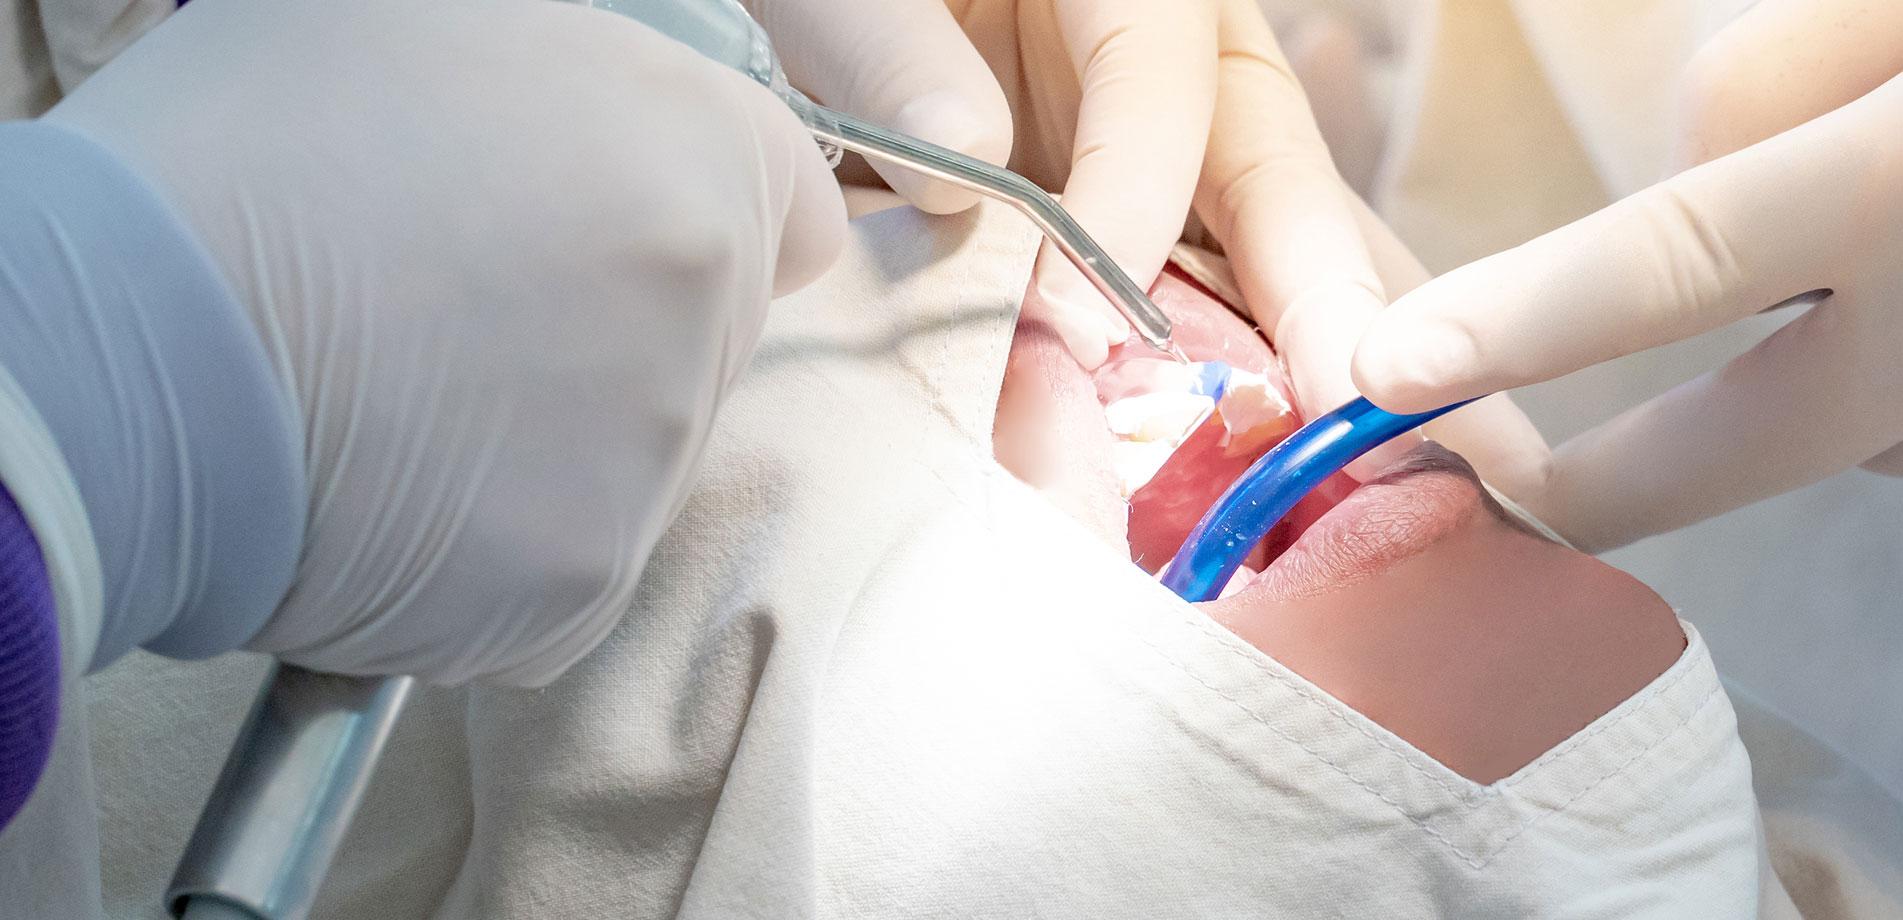 Dental Treatment with General Anesthesia